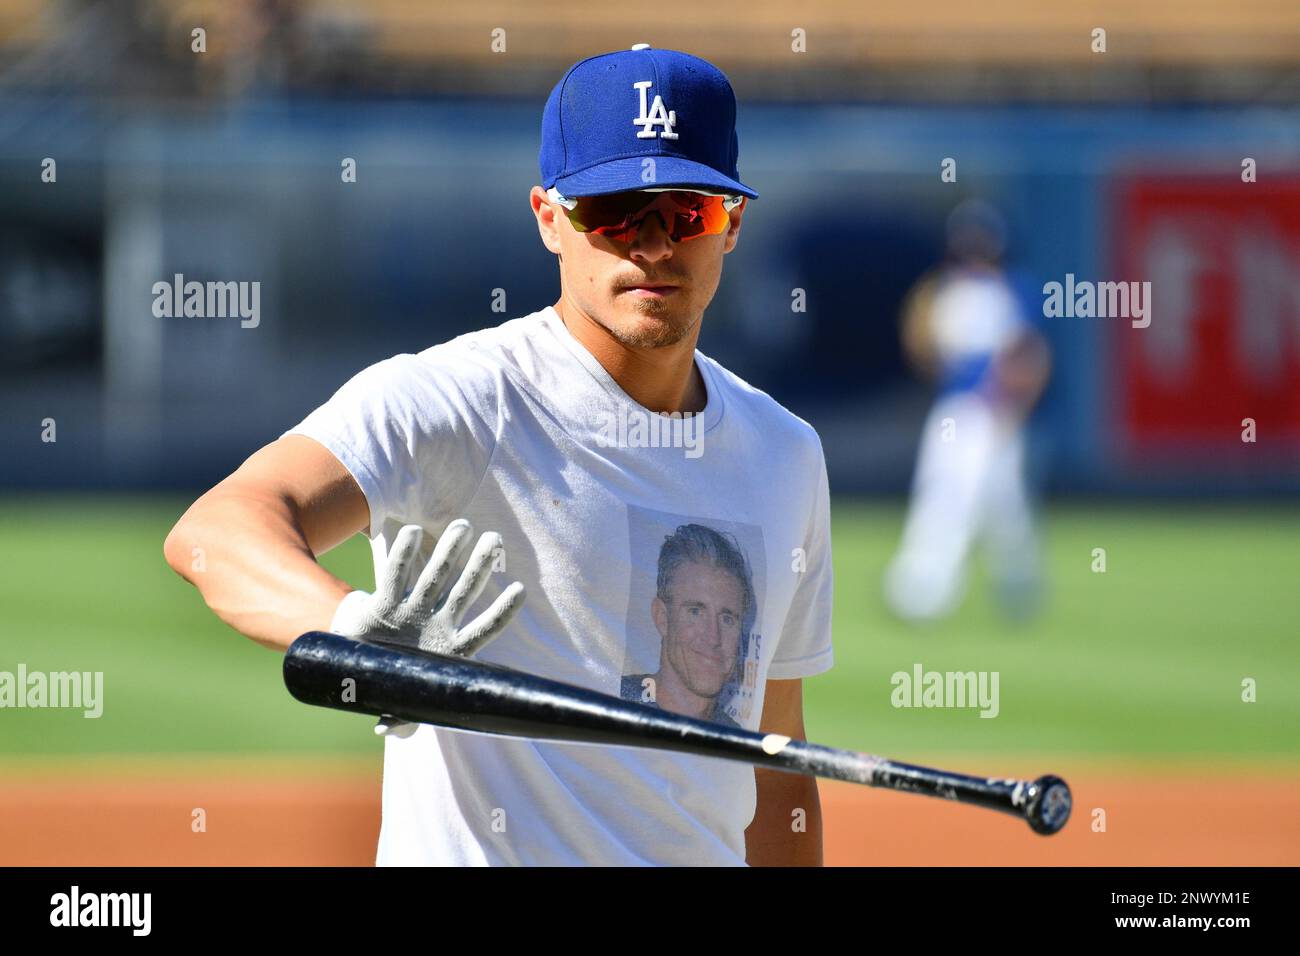 LOS ANGELES, CA - JULY 13: Los Angeles Dodgers outfielder Enrique Hernandez  (14) wears a t-shirt with Los Angeles Dodgers infielder Chase Utley's face  on it during batting practice before a MLB